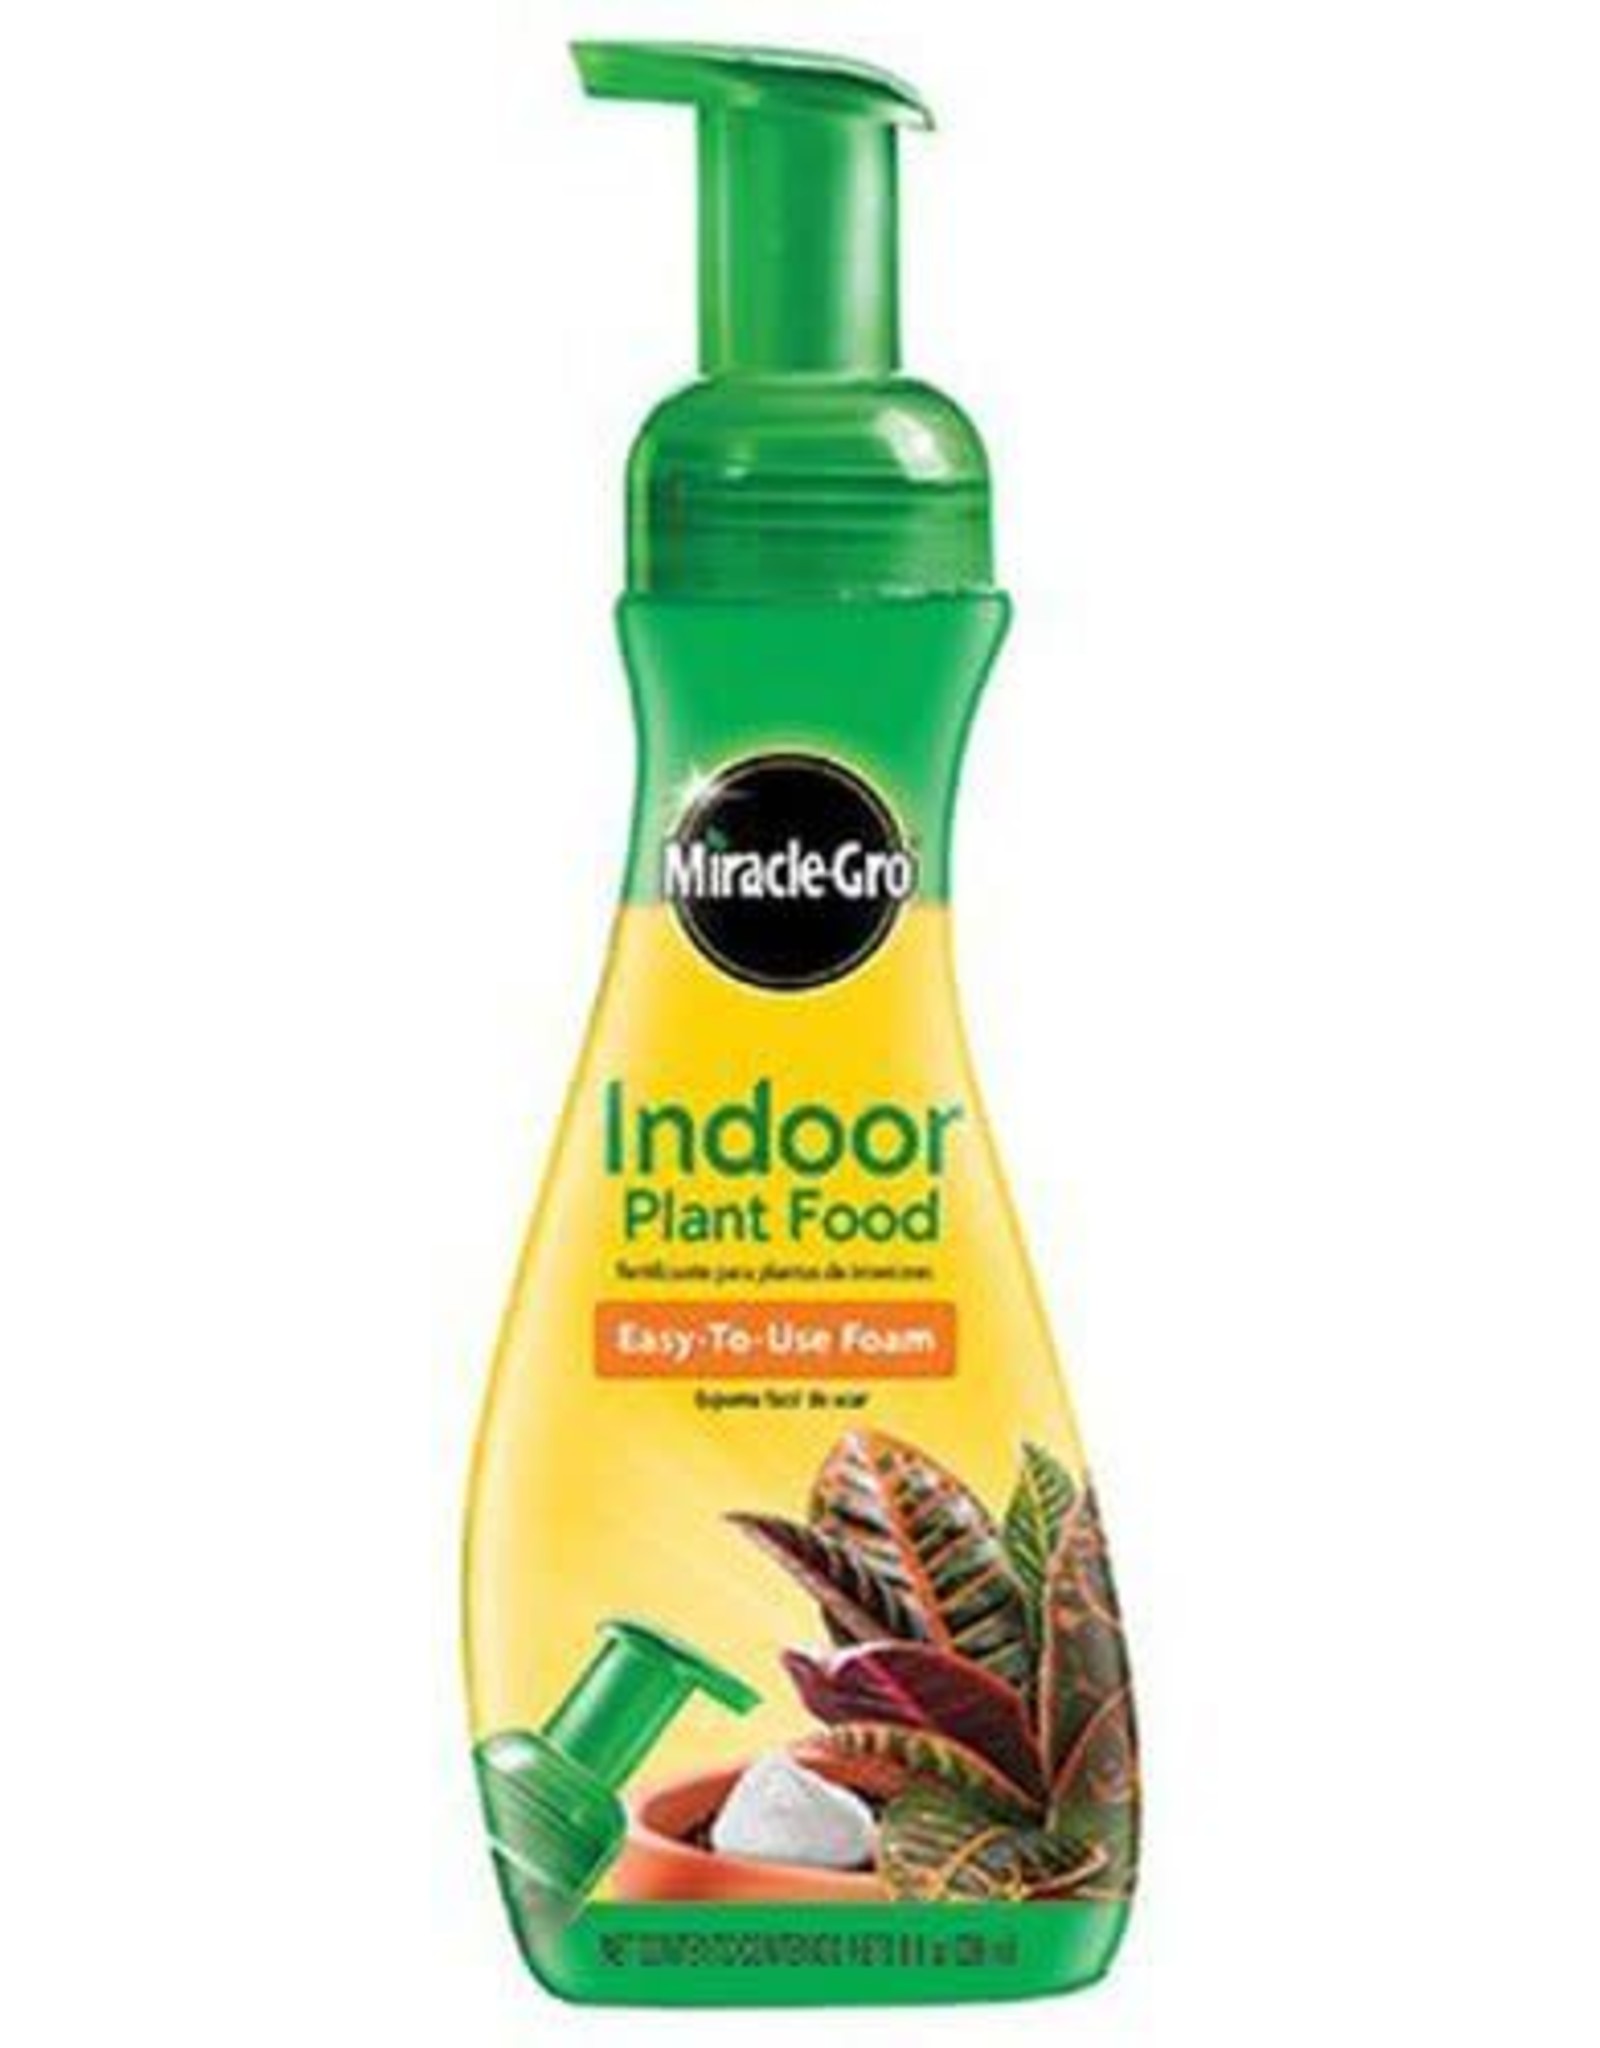 SCOTTS MIRACLE GRO PROD MIRACLE-GRO INDOOR PLANT FOOD 8oz